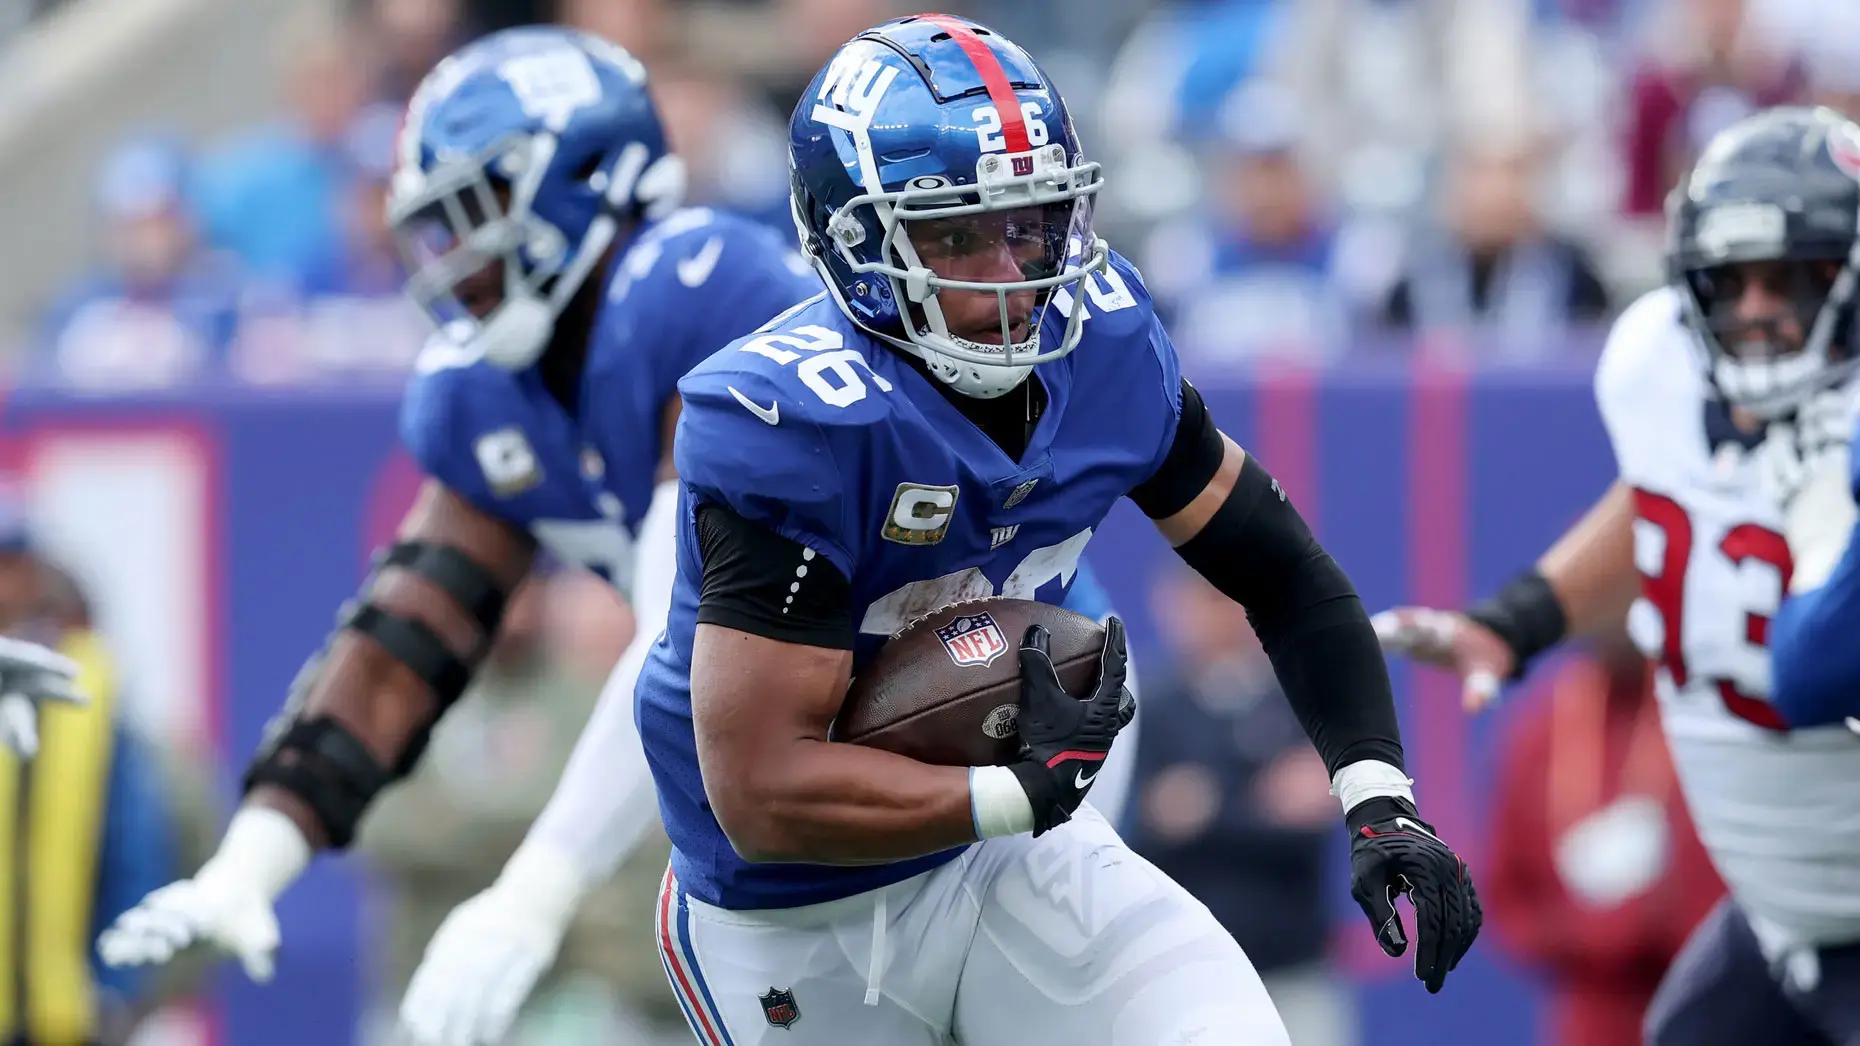 Nov 13, 2022; East Rutherford, New Jersey, USA; New York Giants running back Saquon Barkley (26) runs with the ball against the Houston Texans during the first quarter at MetLife Stadium. / Brad Penner-USA TODAY Sports